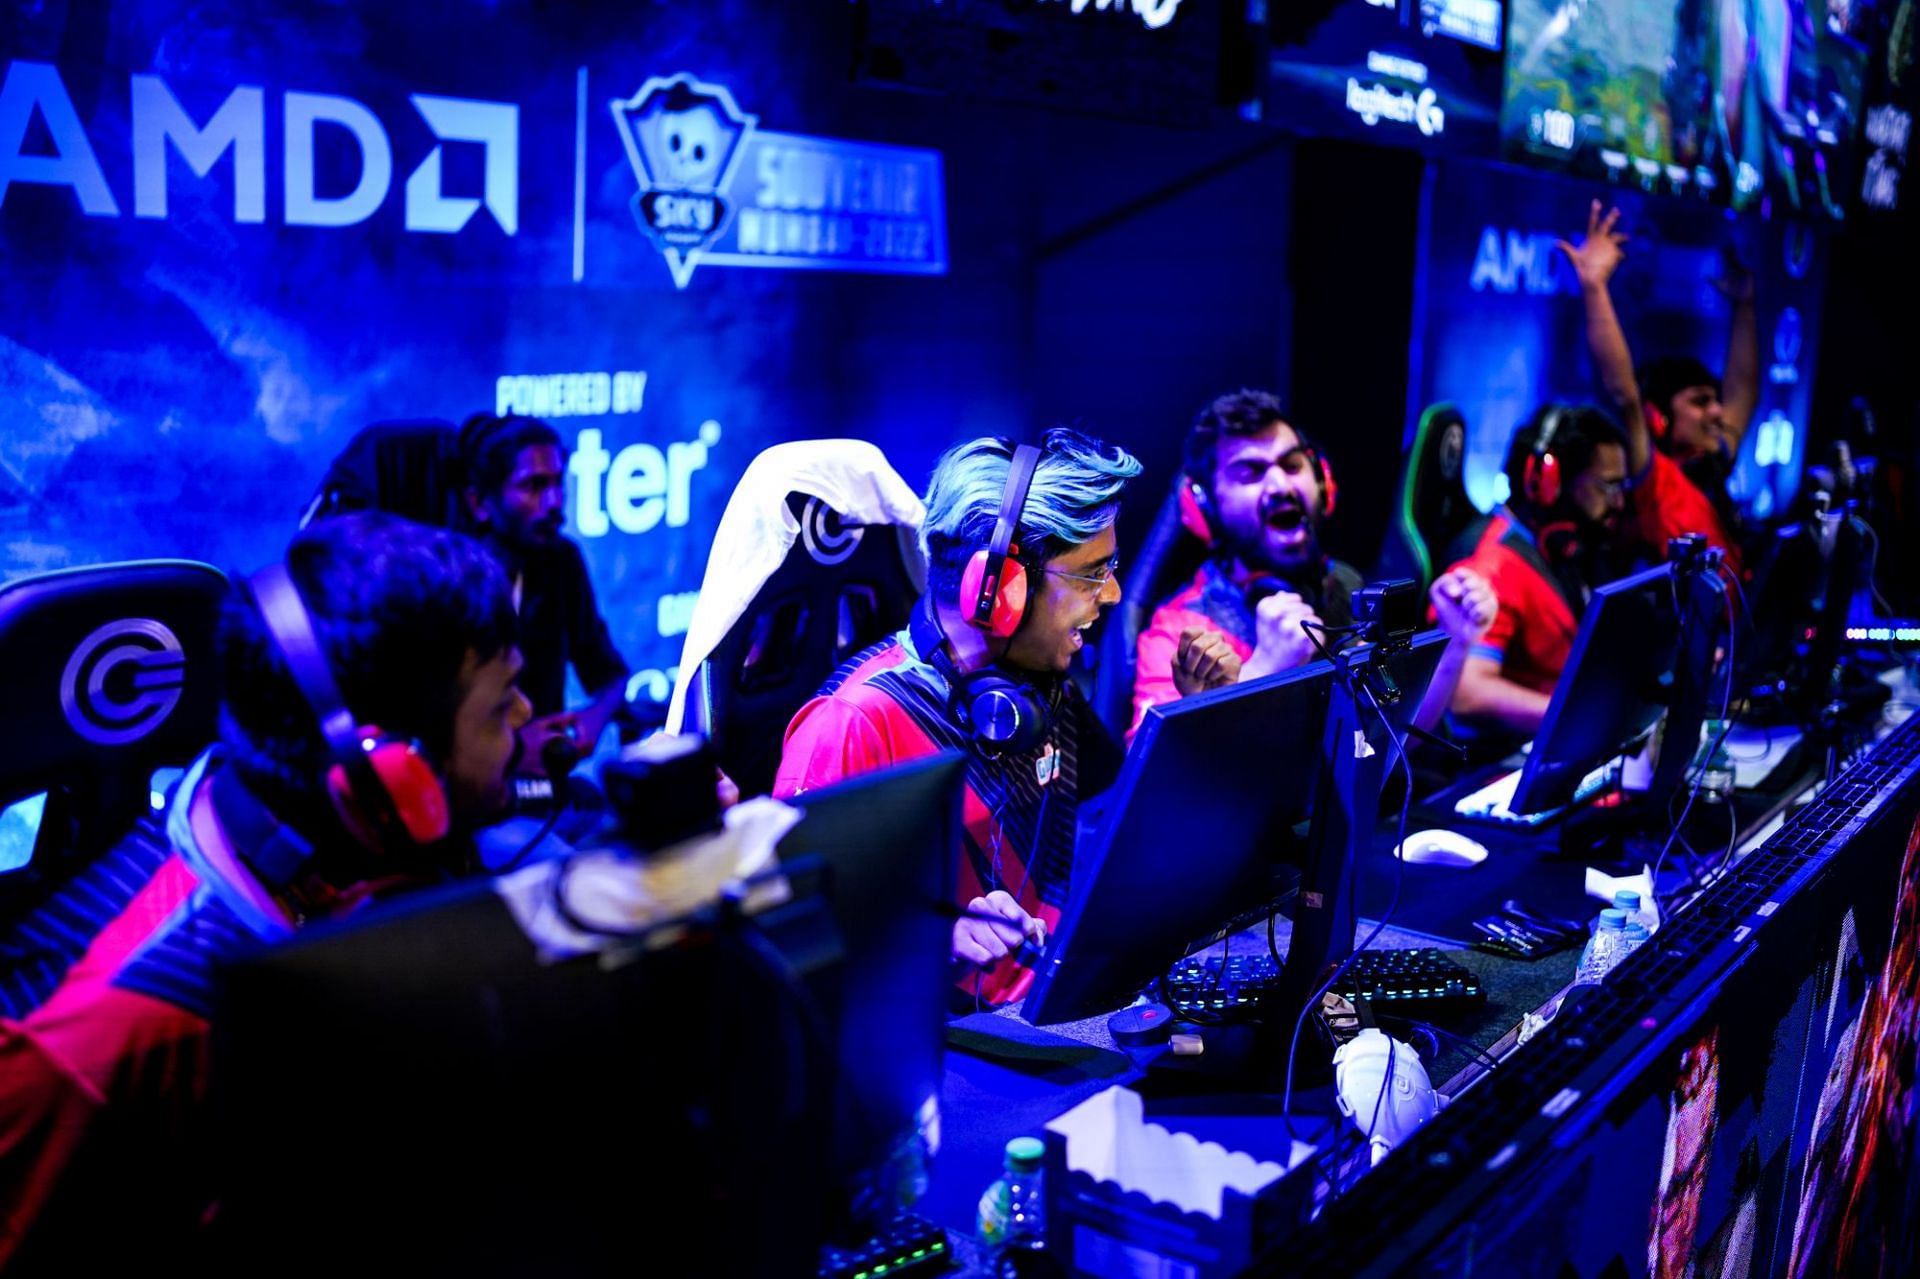 Global Esports has been crowned the champion of AMD Skyesports Souvenir Valorant LAN Championship (Image via Skyesports)